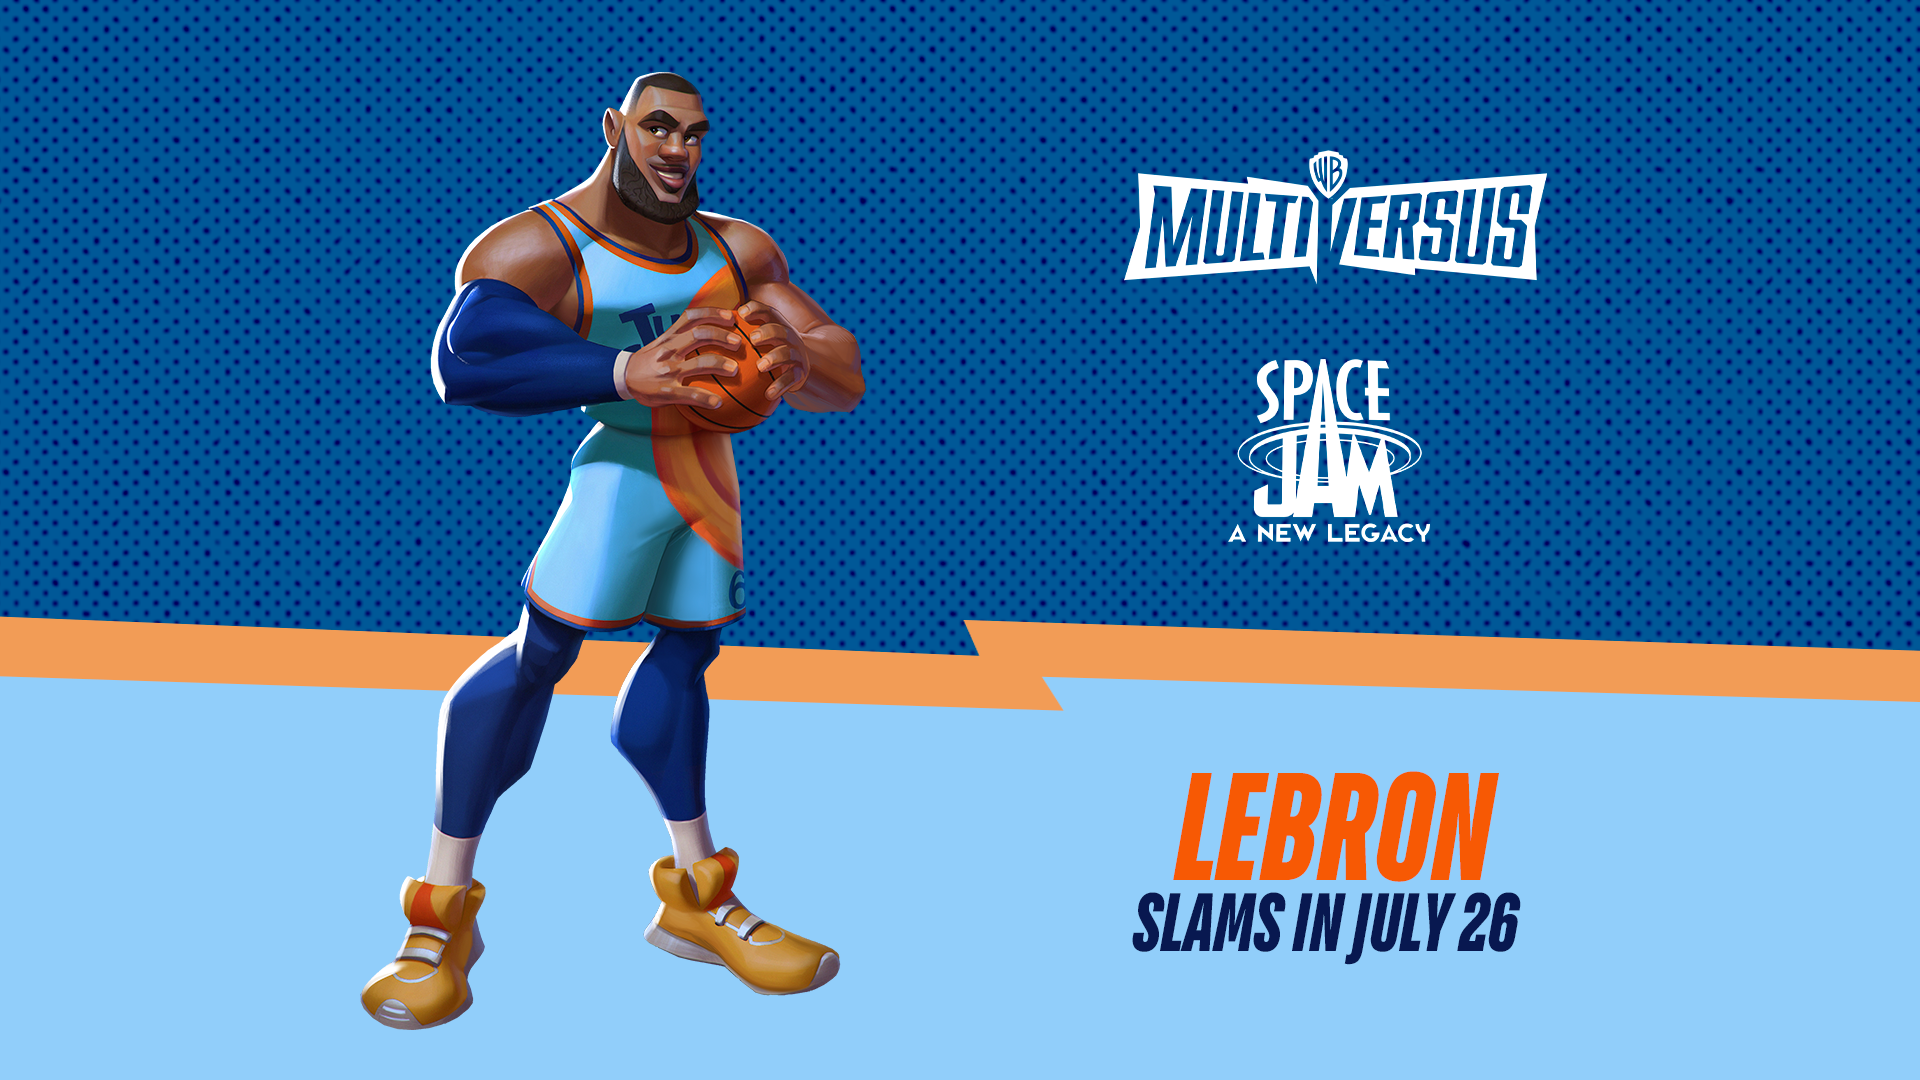 MultiVersus roster expands with Rick and Morty, LeBron James | VG247